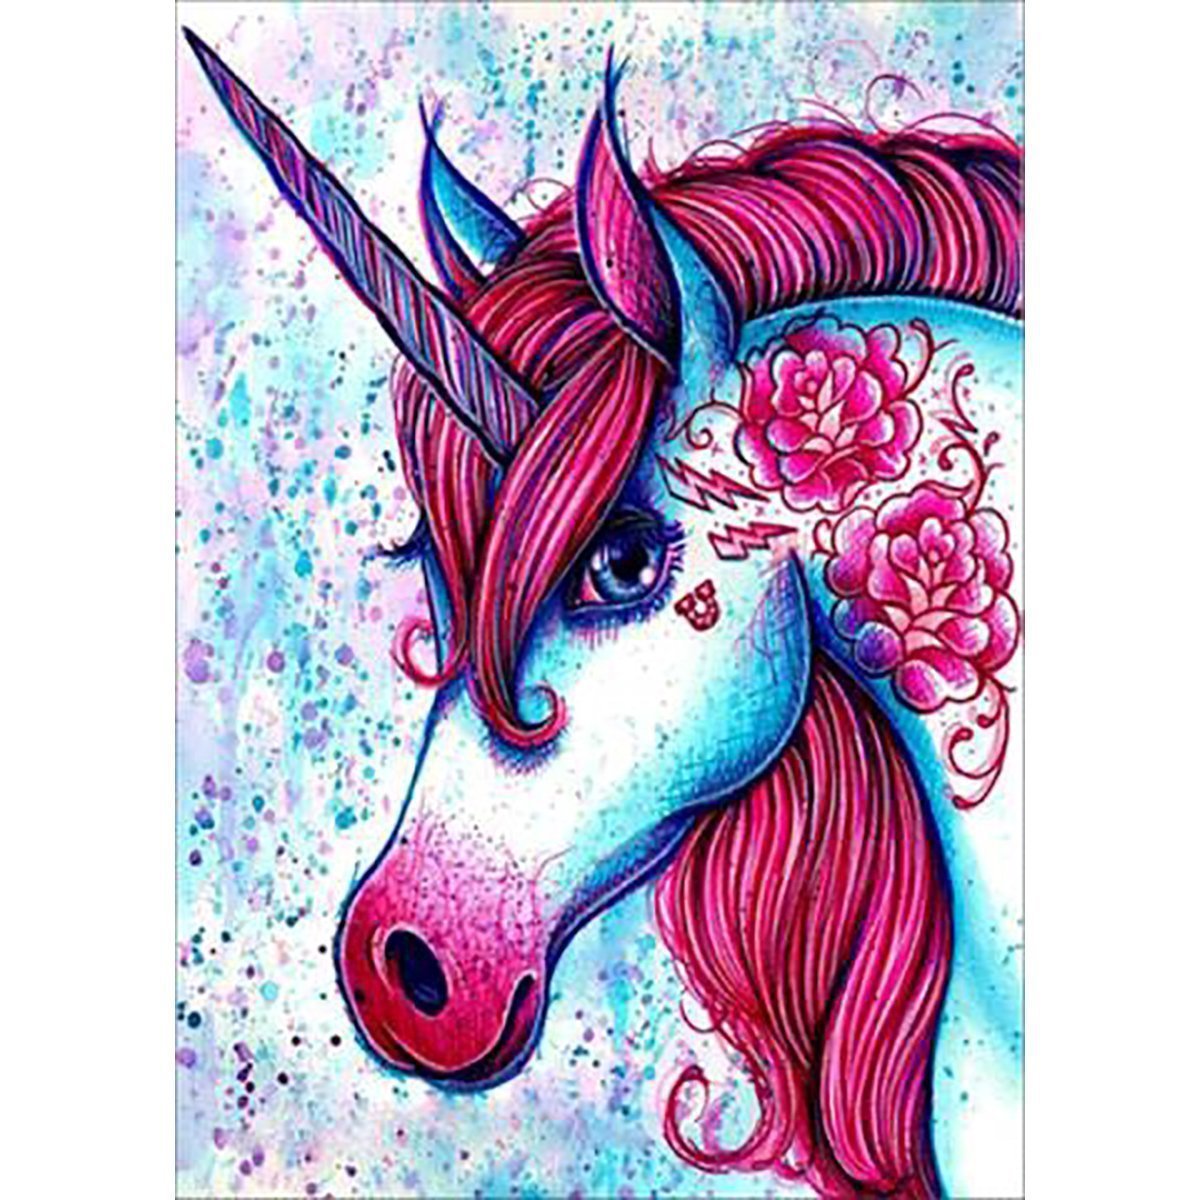 Size 30 x 40 cm Full,Diamond Embroidery, Horse Full Square Diamond Painting , Diamond Paintings ,5D,Diamond Painting,Cross Stitch,3D,Diamond Mosaic,Needlework,Crafts,Christmas,Gift,Embroidery Cross Stitch ,mosaic picture